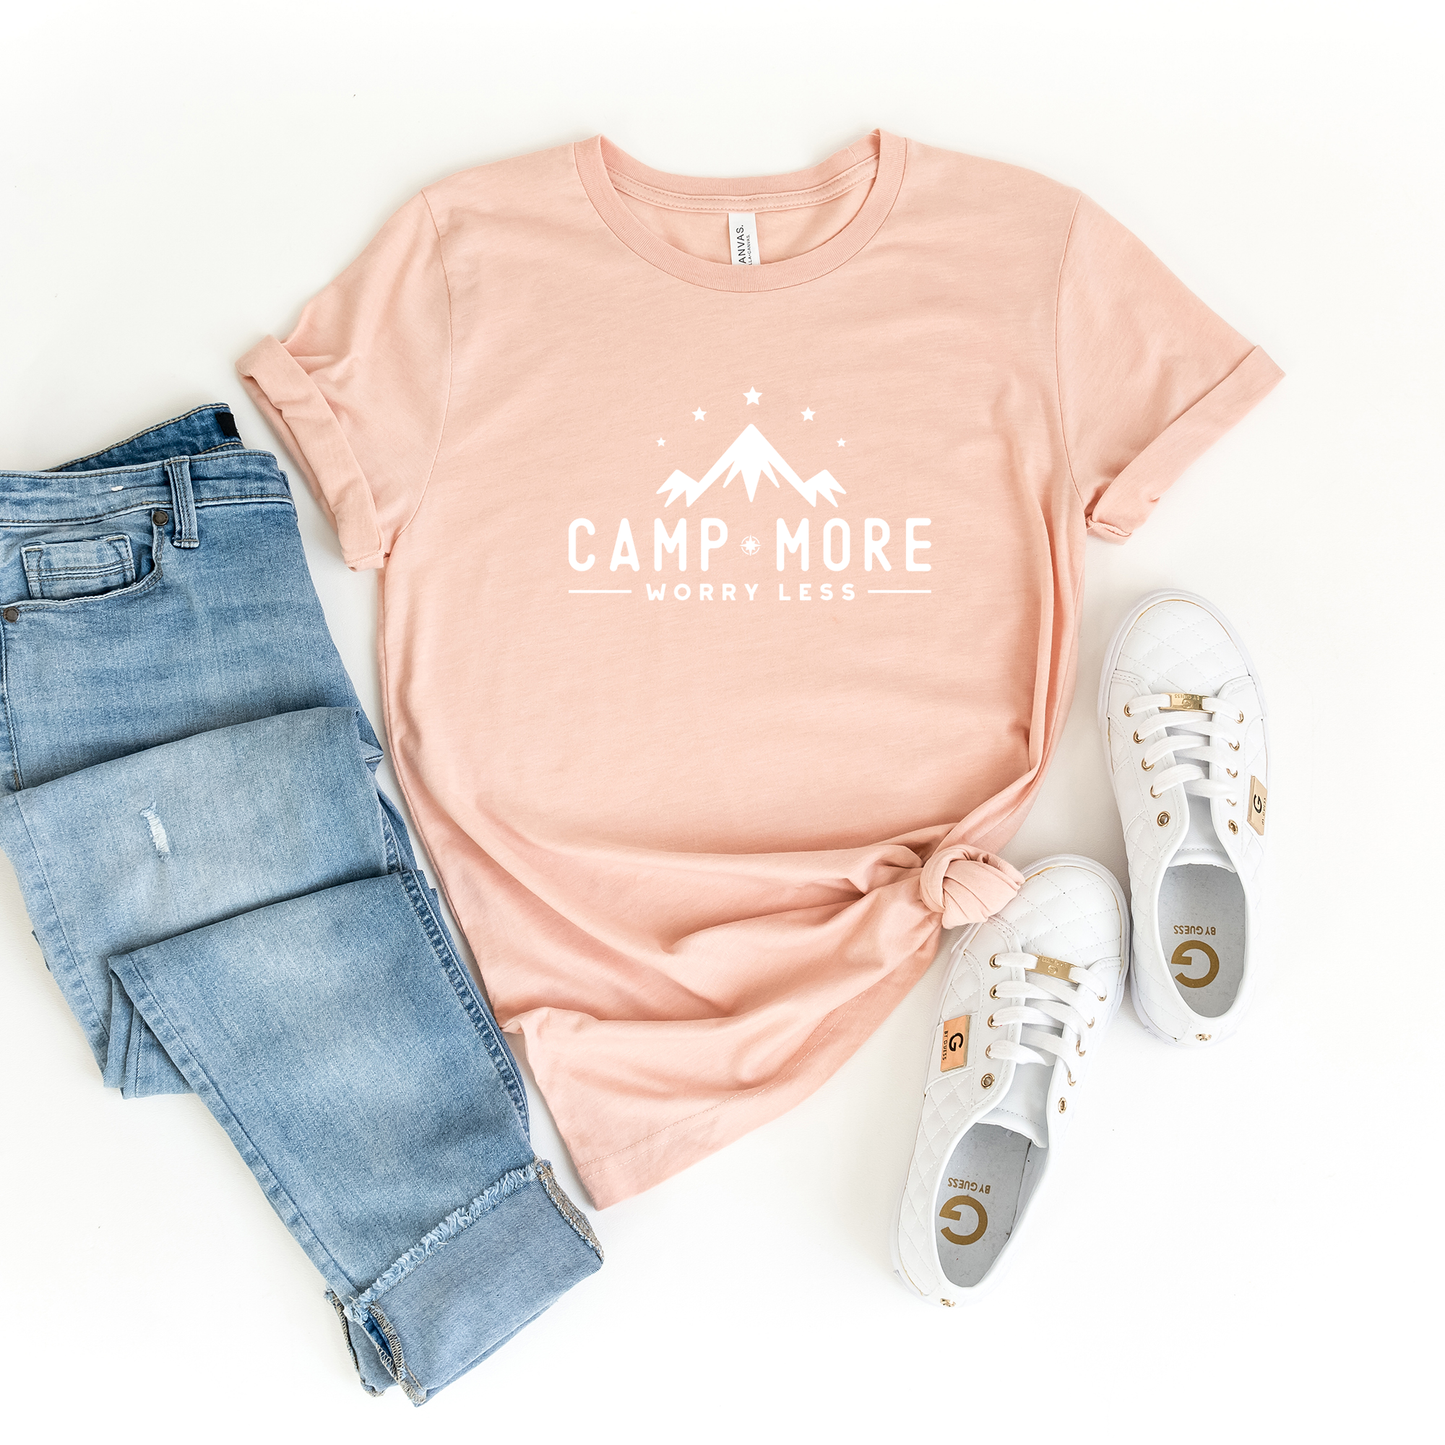 Camp More Worry Less Mountains | Short Sleeve Crew Neck